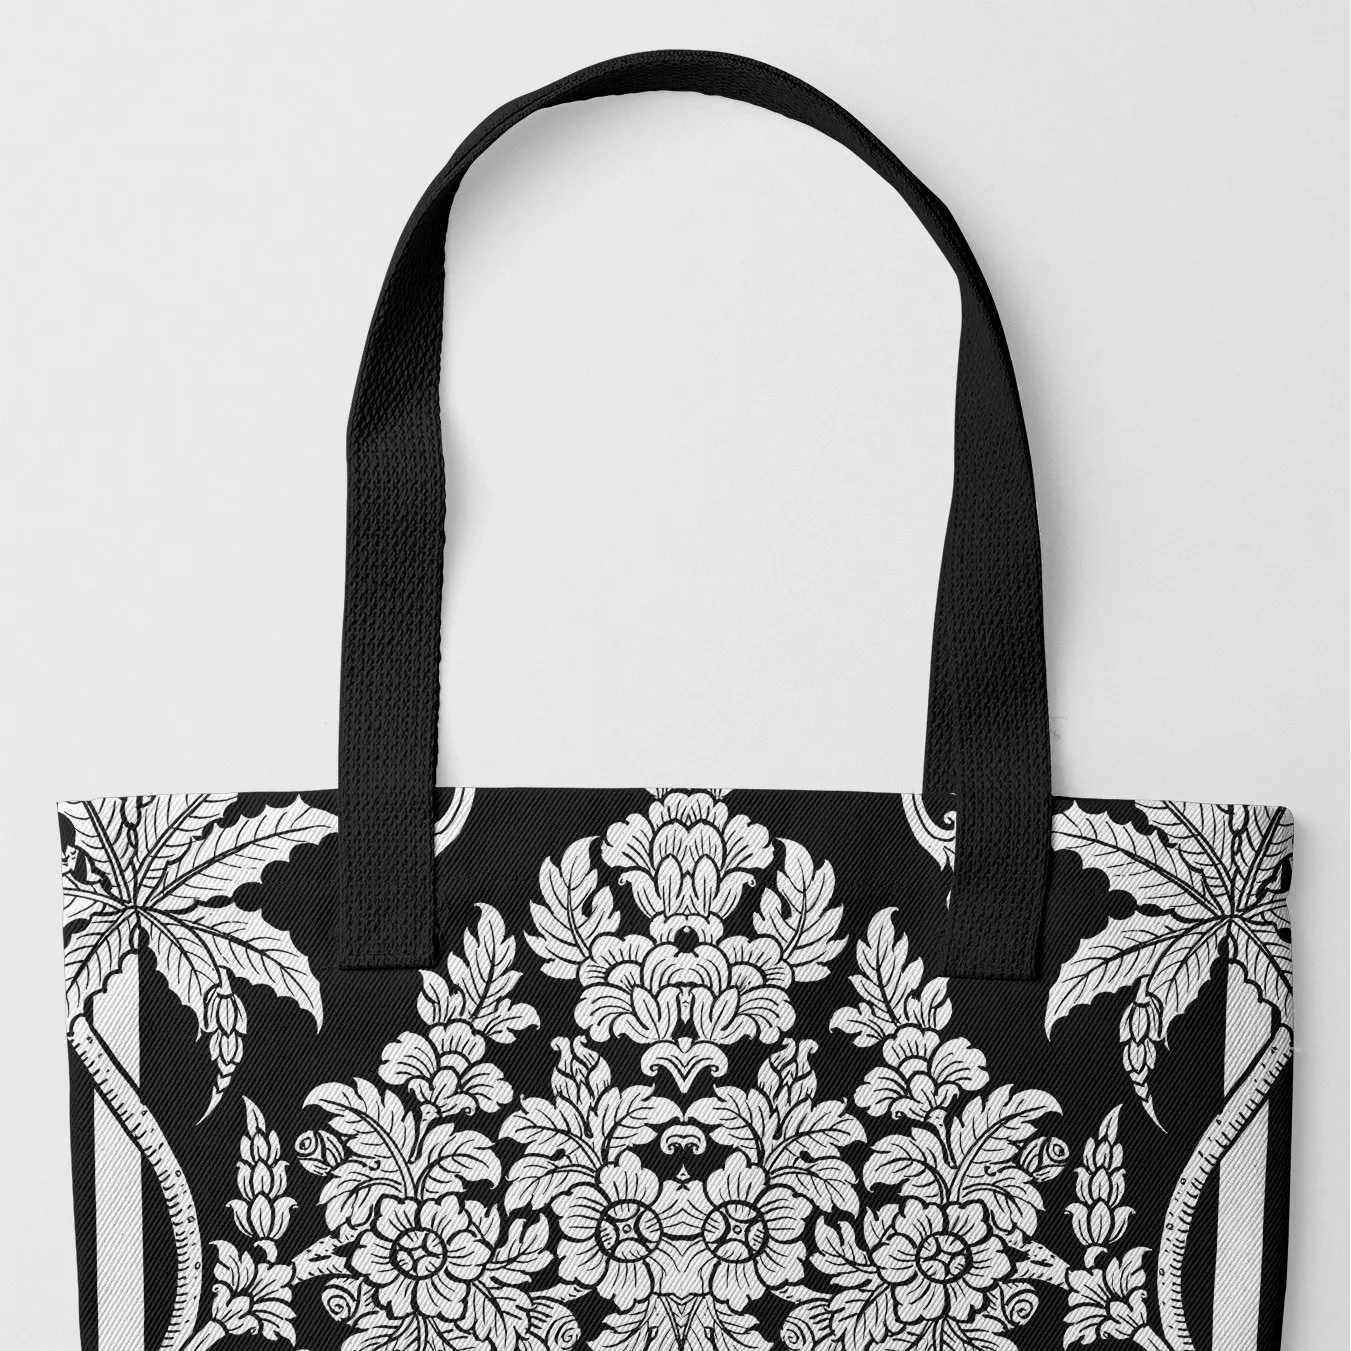 Midnight Oasis Tote Bag-black And White - Heavy Duty Reusable Grocery Bag - Black Handles - Shopping Totes - Aesthetic